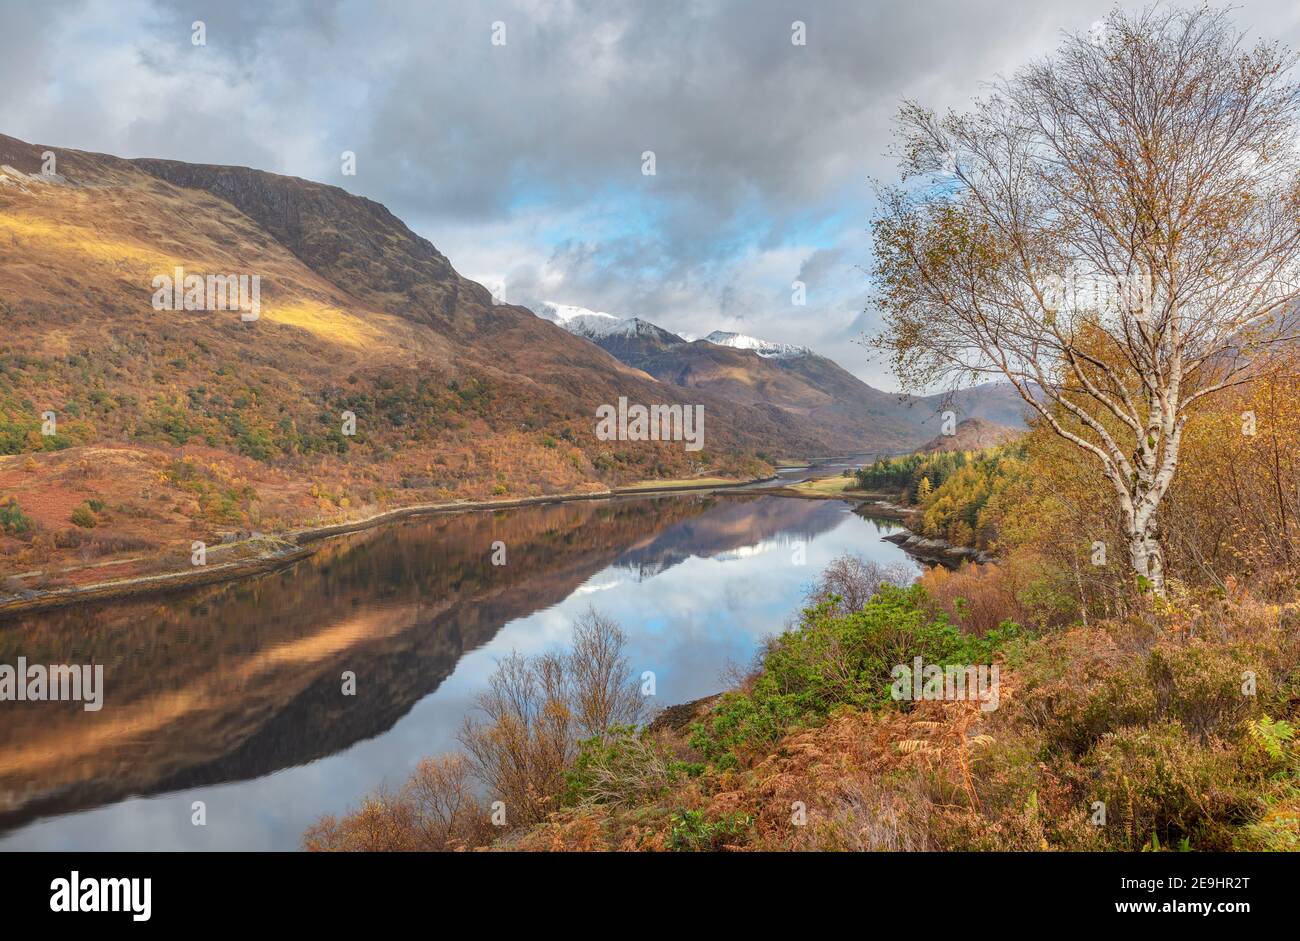 Glencoe, Scotland: Birch tree and fall underbrush along the Loch Leven with mountain reflections Stock Photo